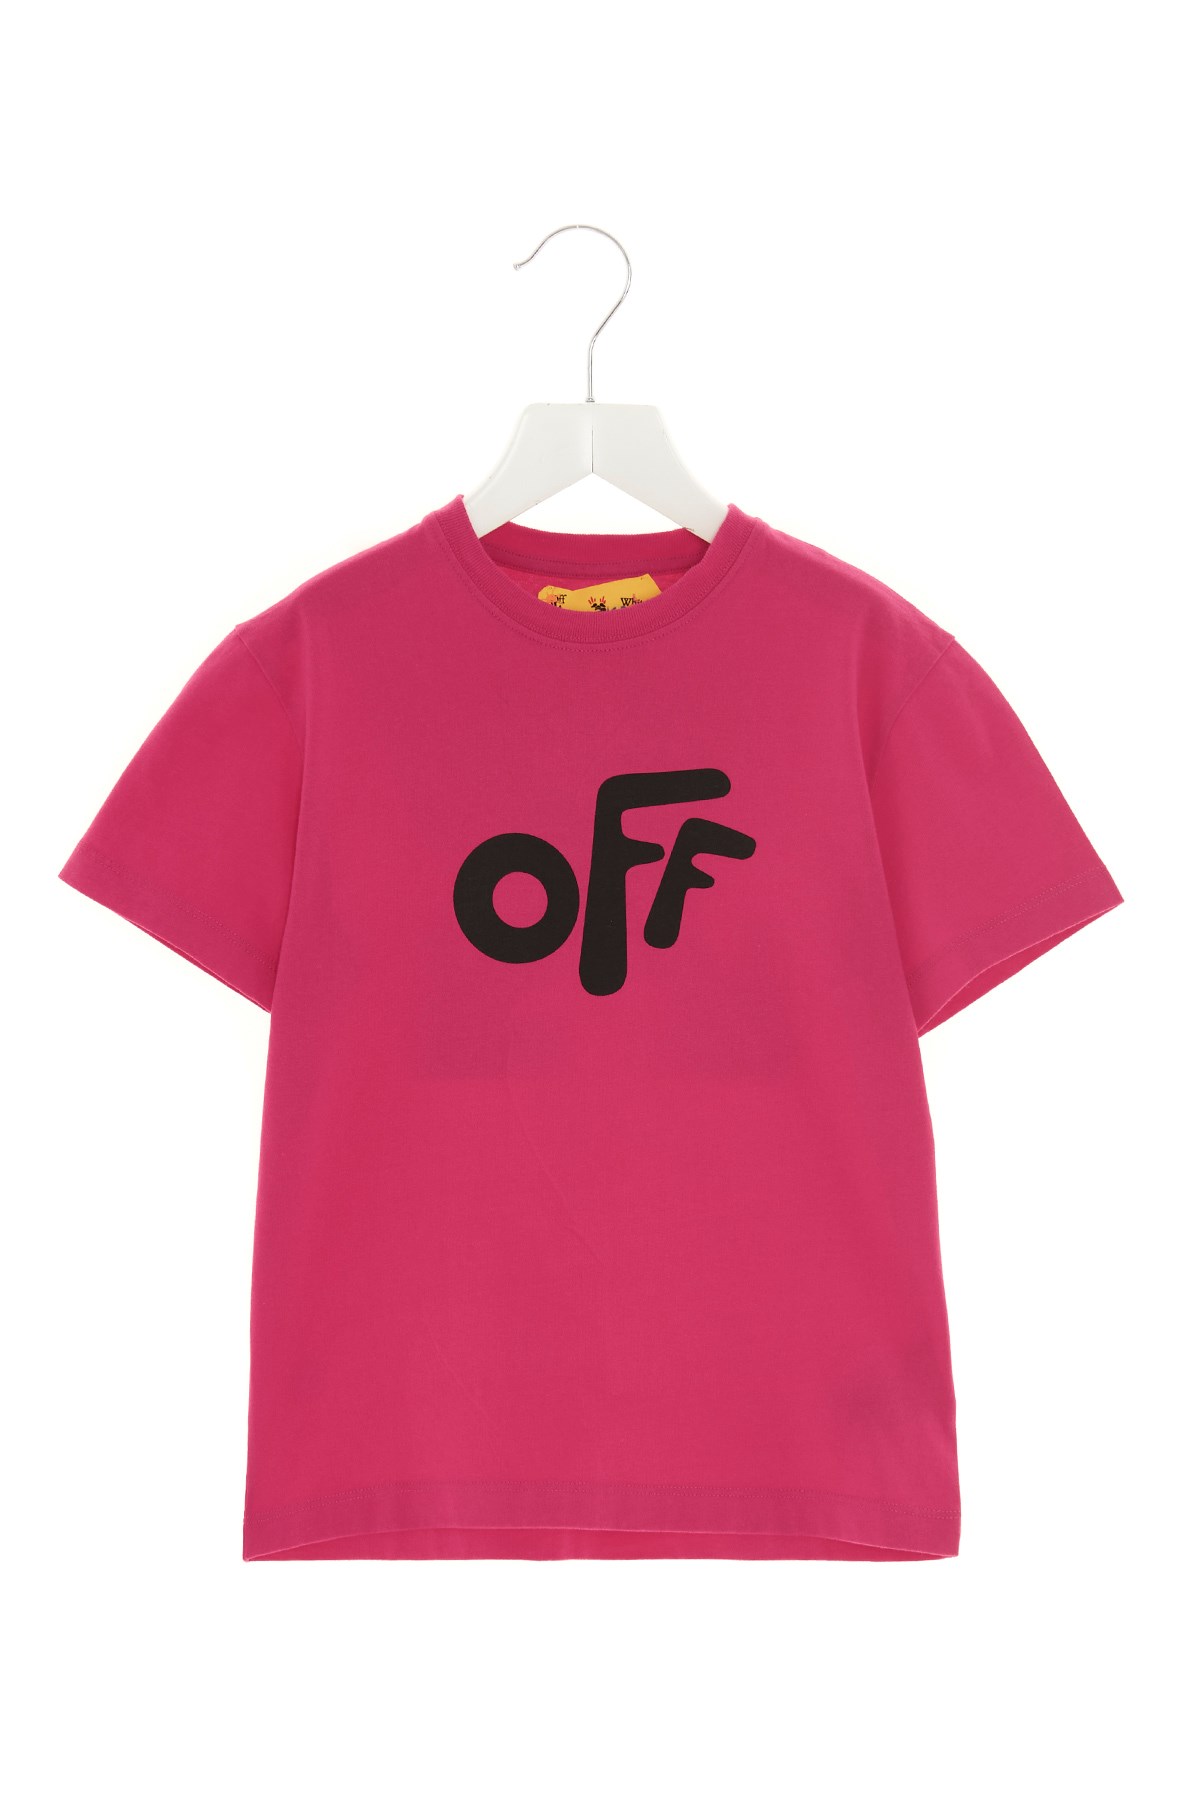 OFF-WHITE T-Shirt 'Off Rounded Arrow'